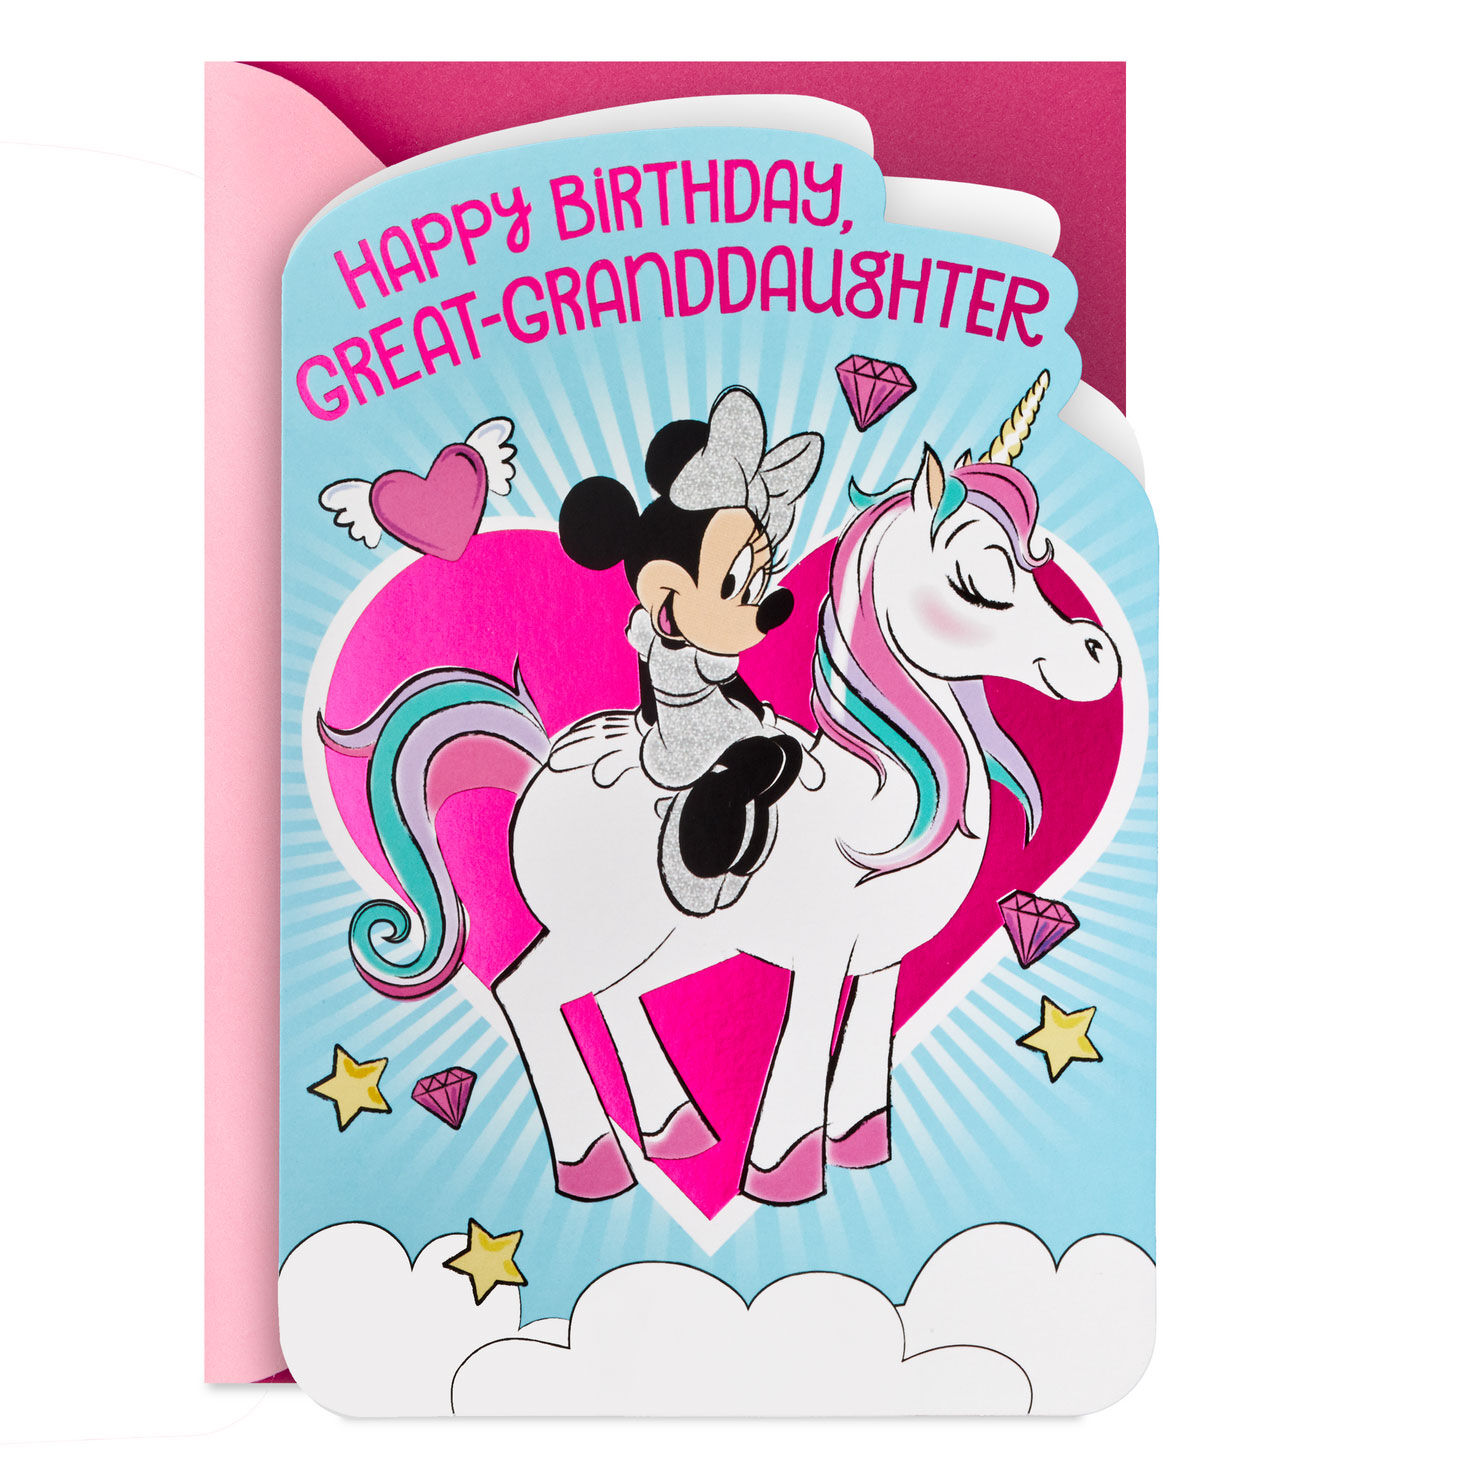 Disney Minnie Mouse on Unicorn Birthday Card for Great-Granddaughter for only USD 2.99 | Hallmark